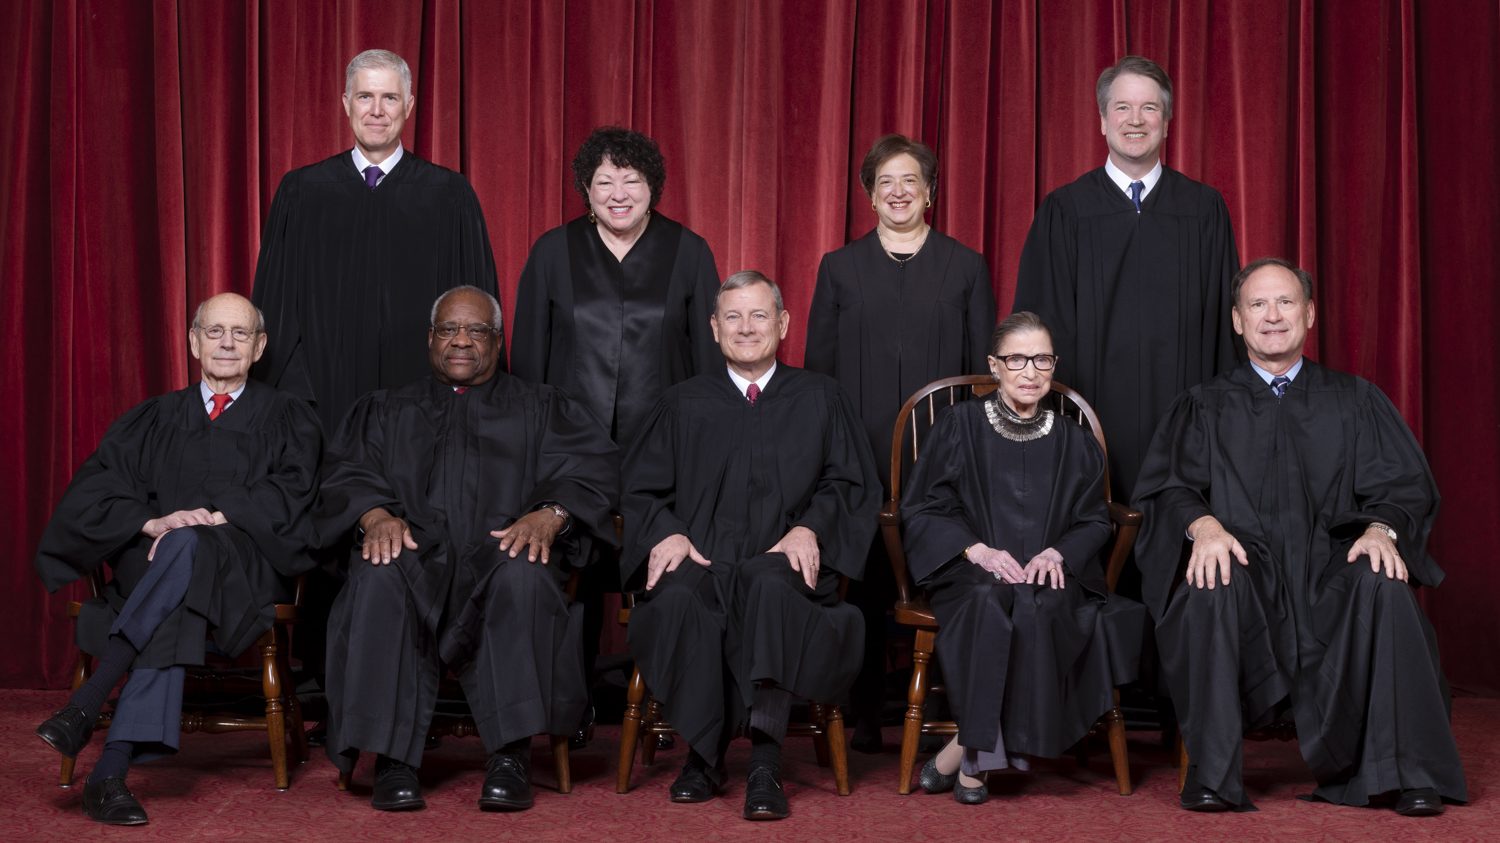 who-are-the-remaining-liberal-justices-on-the-supreme-court-heavy